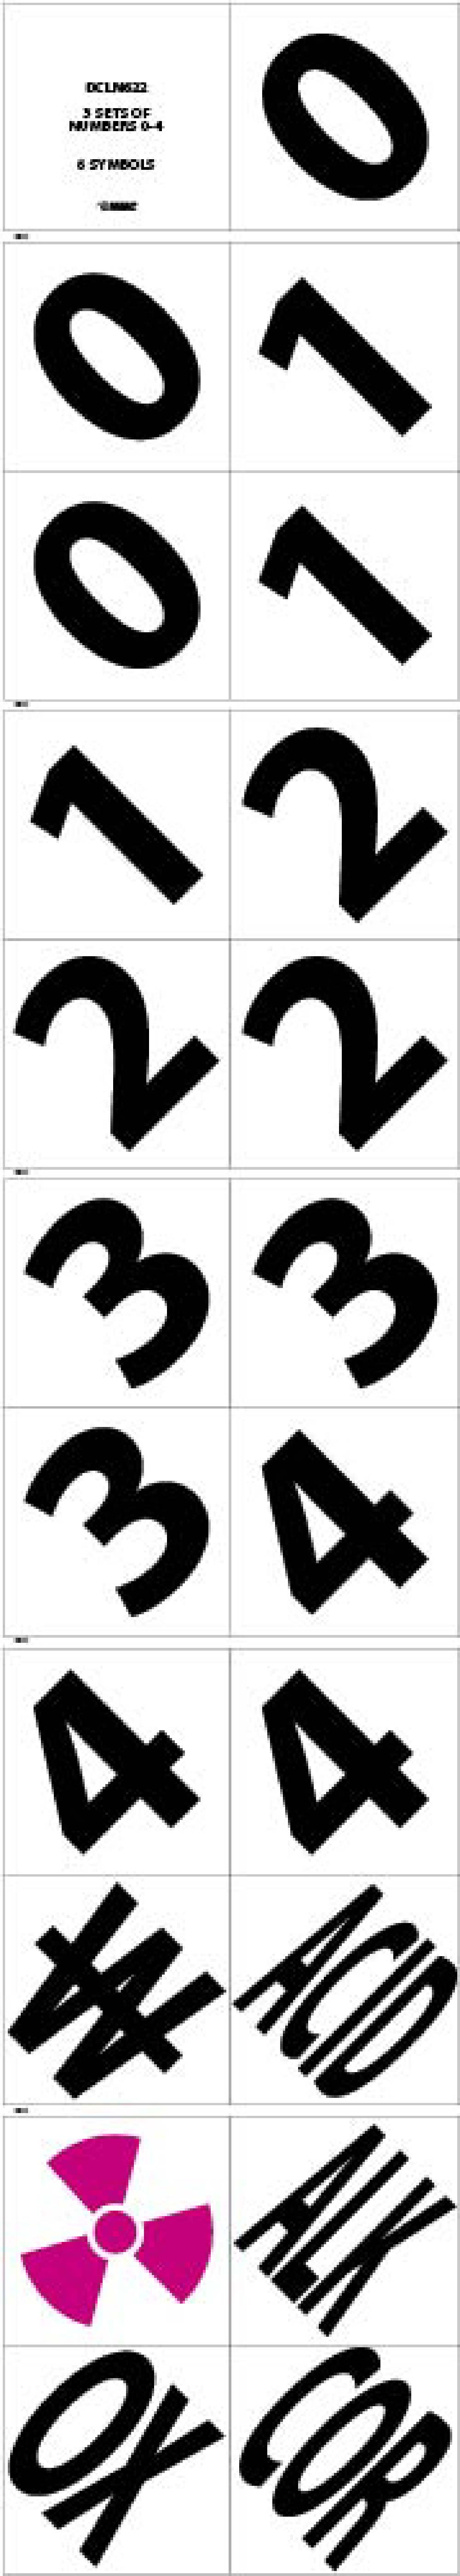 6" Number And Symbol Kit-eSafety Supplies, Inc